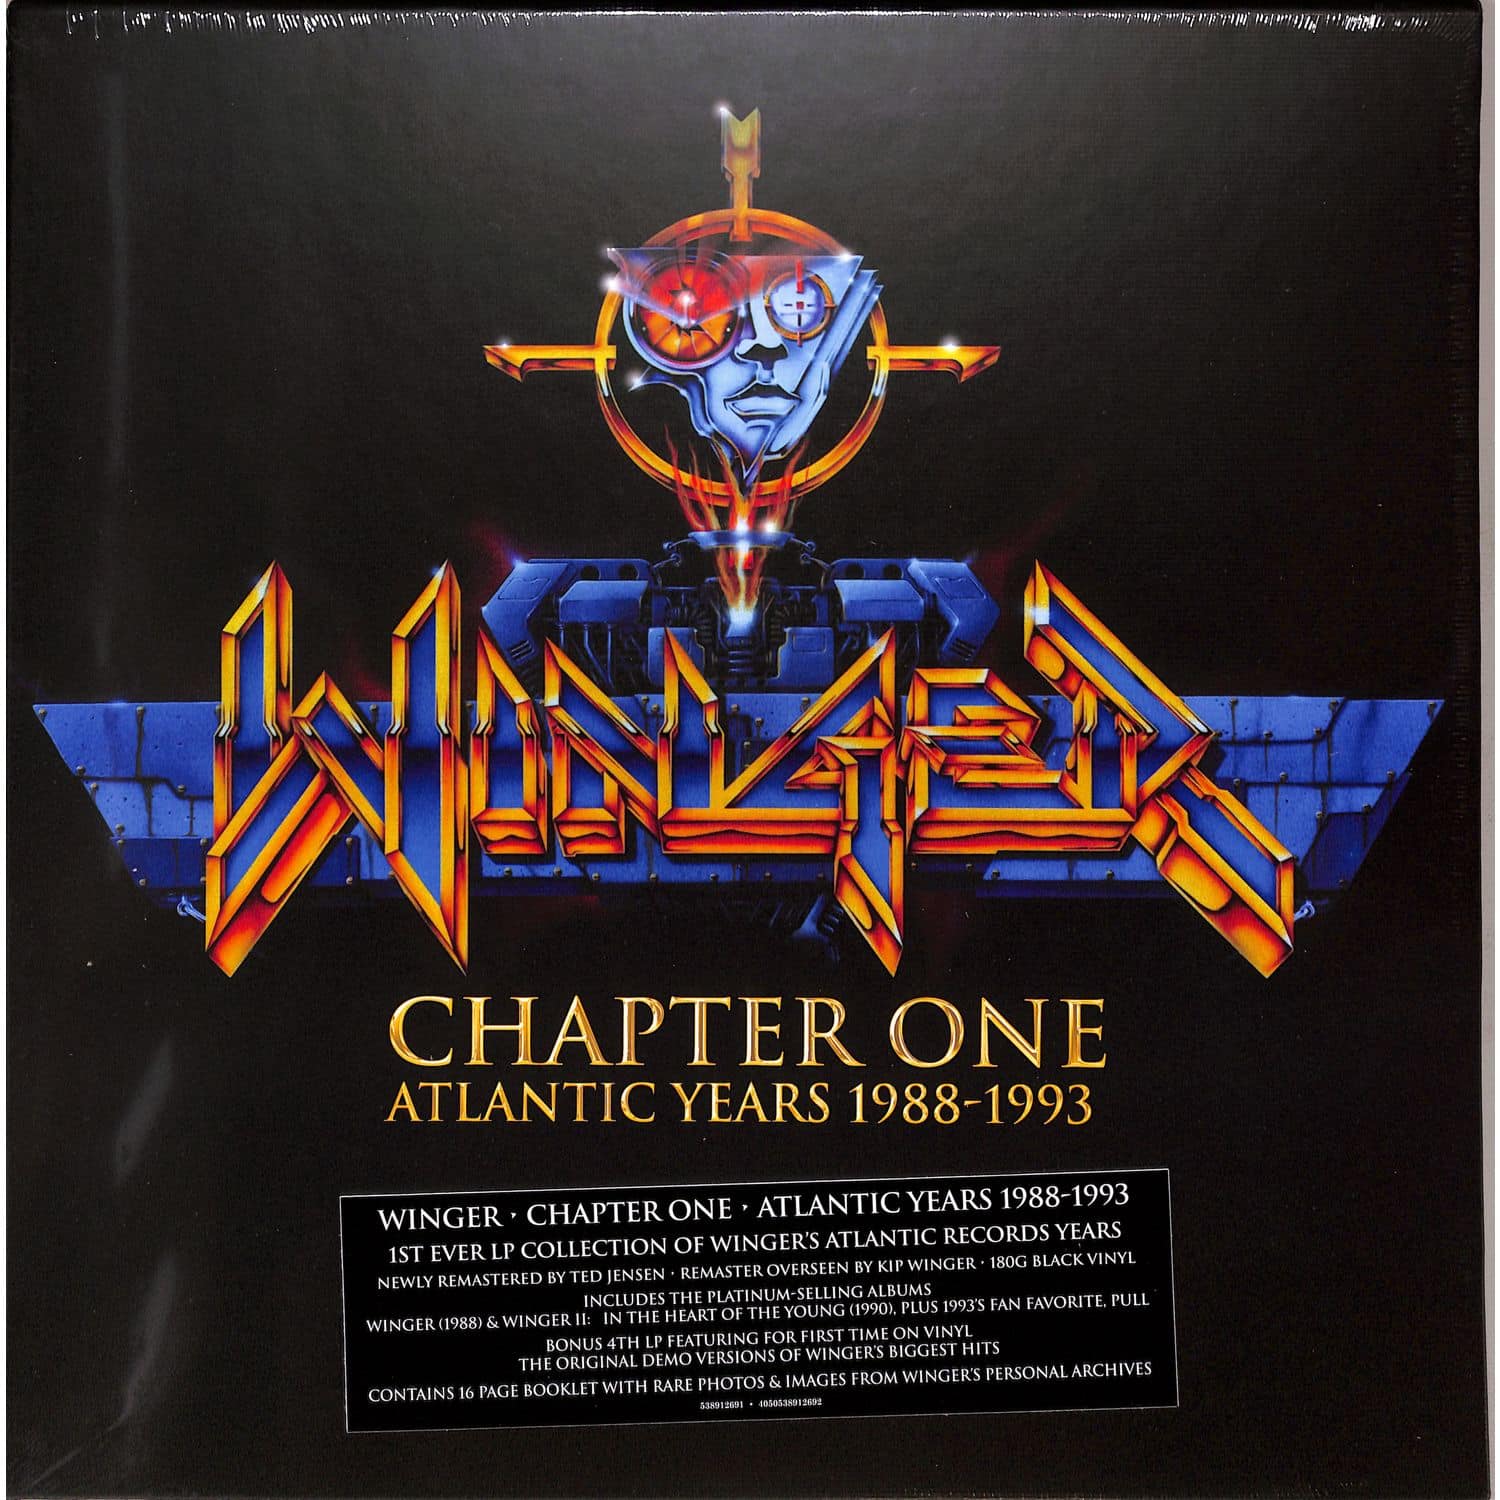 Winger - CHAPTER ONE:ATLANTIC YEARS 1988-1993 